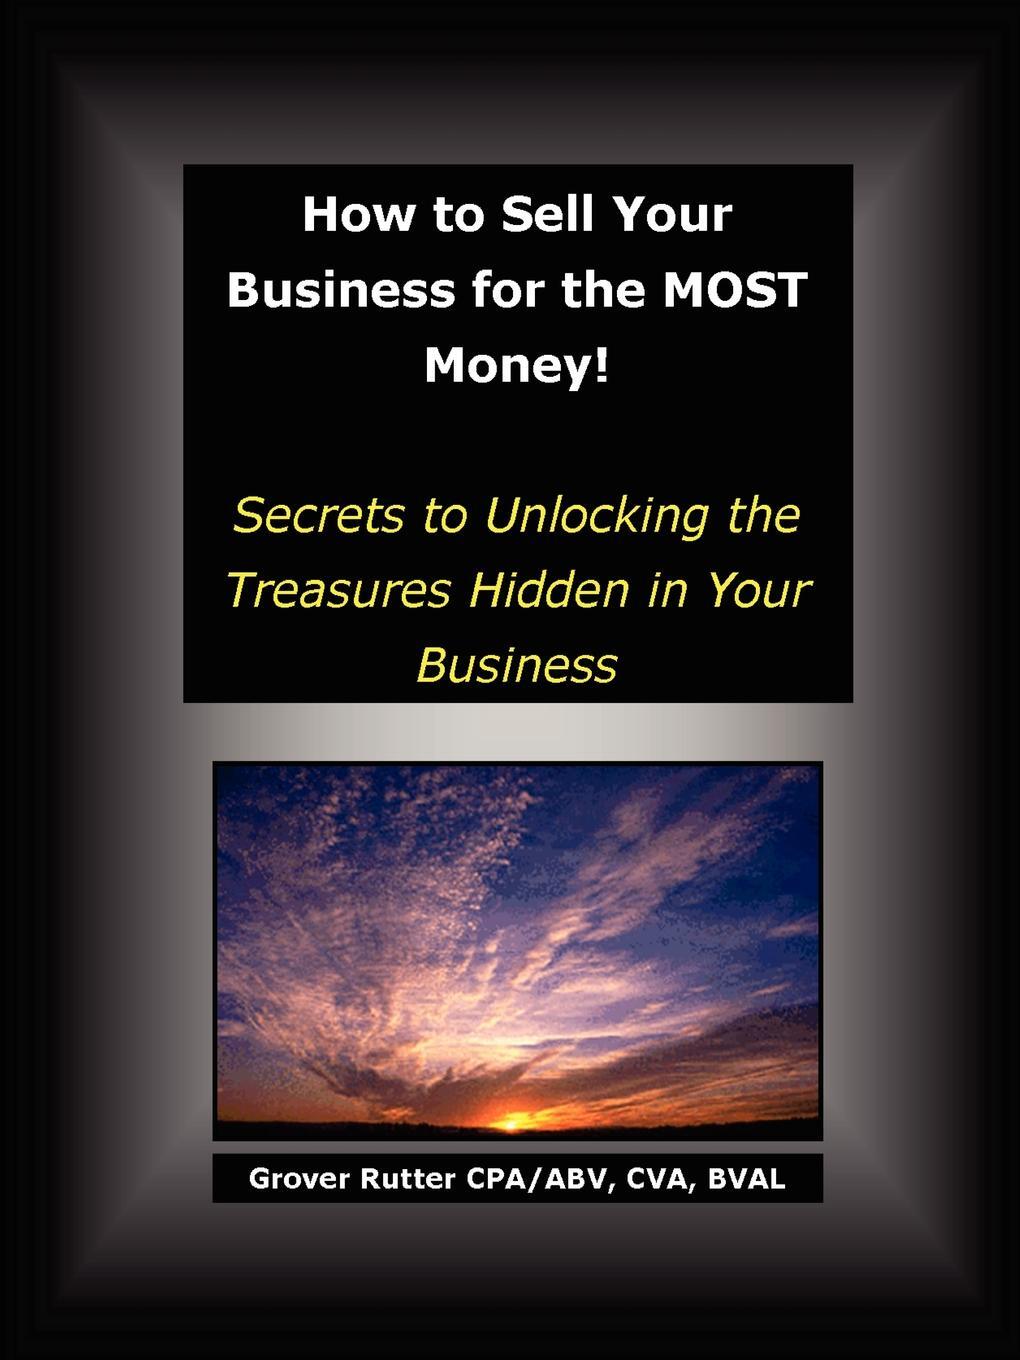 фото How to Sell Your Business for the Most Money. Secrets to Unlocking the Treasures Hidden in Your Business